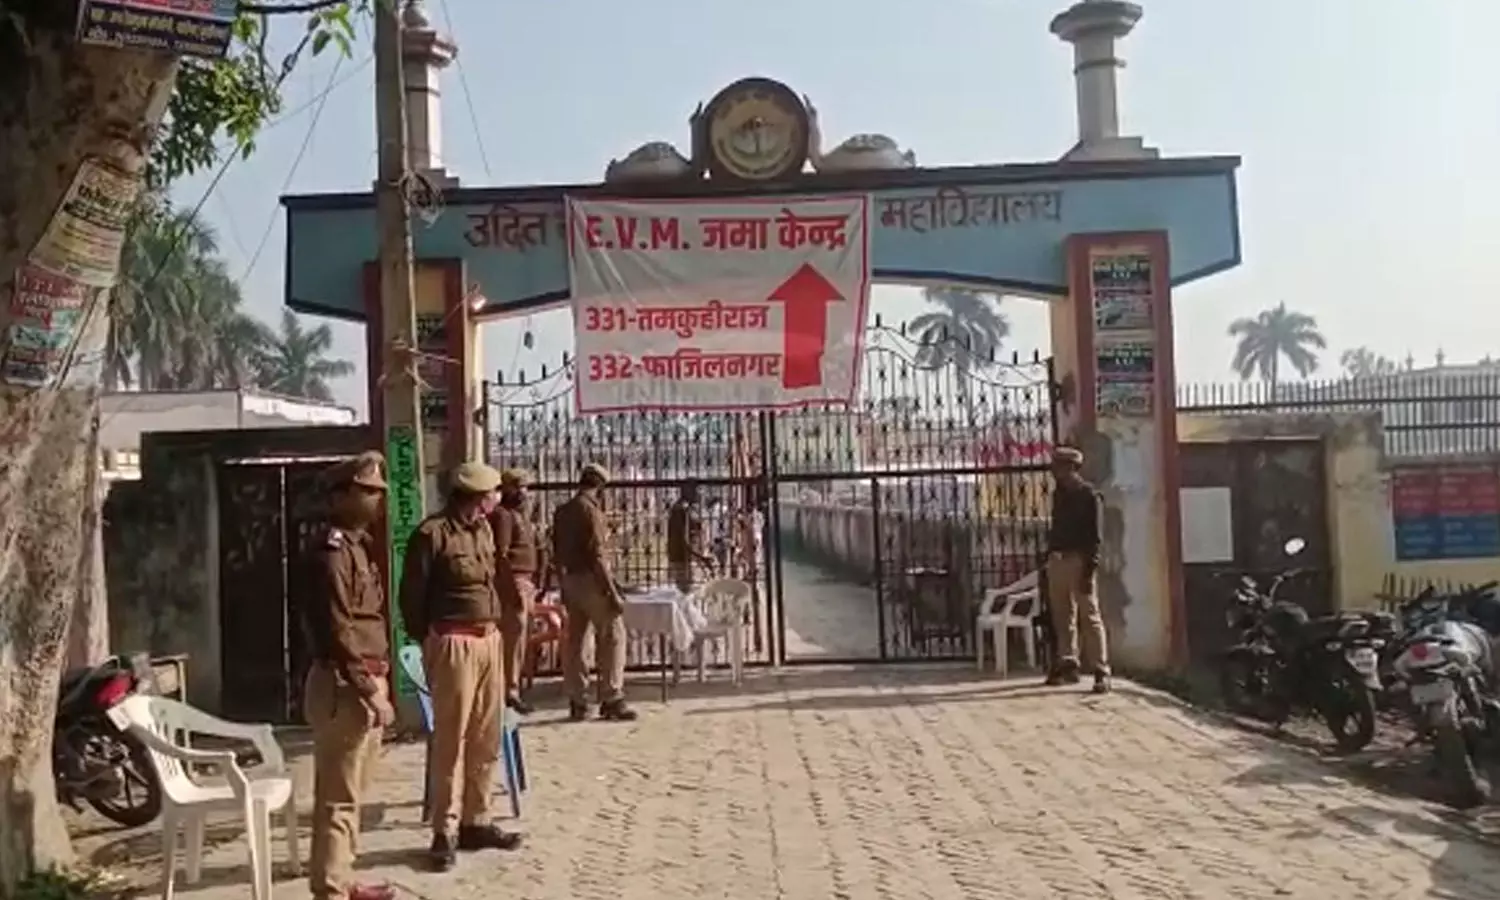 UP Election 2022: EVMs kept amidst tight security, every movement is closely monitored by security personnel